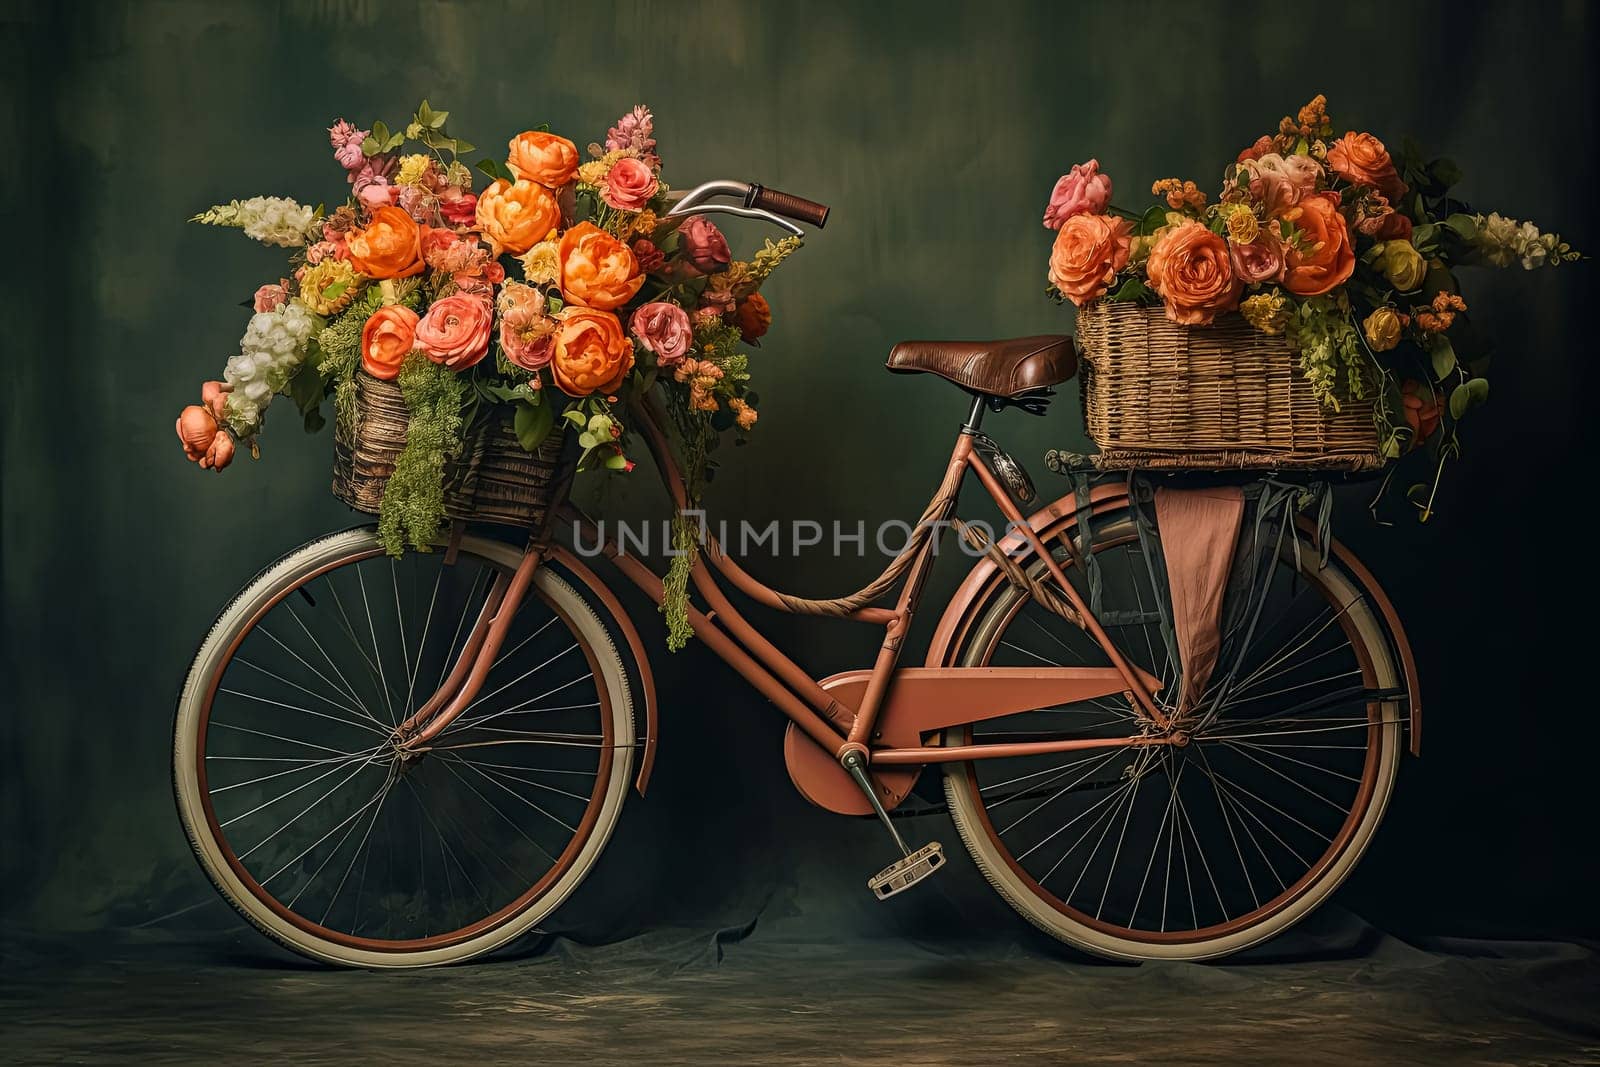 A bicycle with a basket full of flowers on it. by Alla_Morozova93